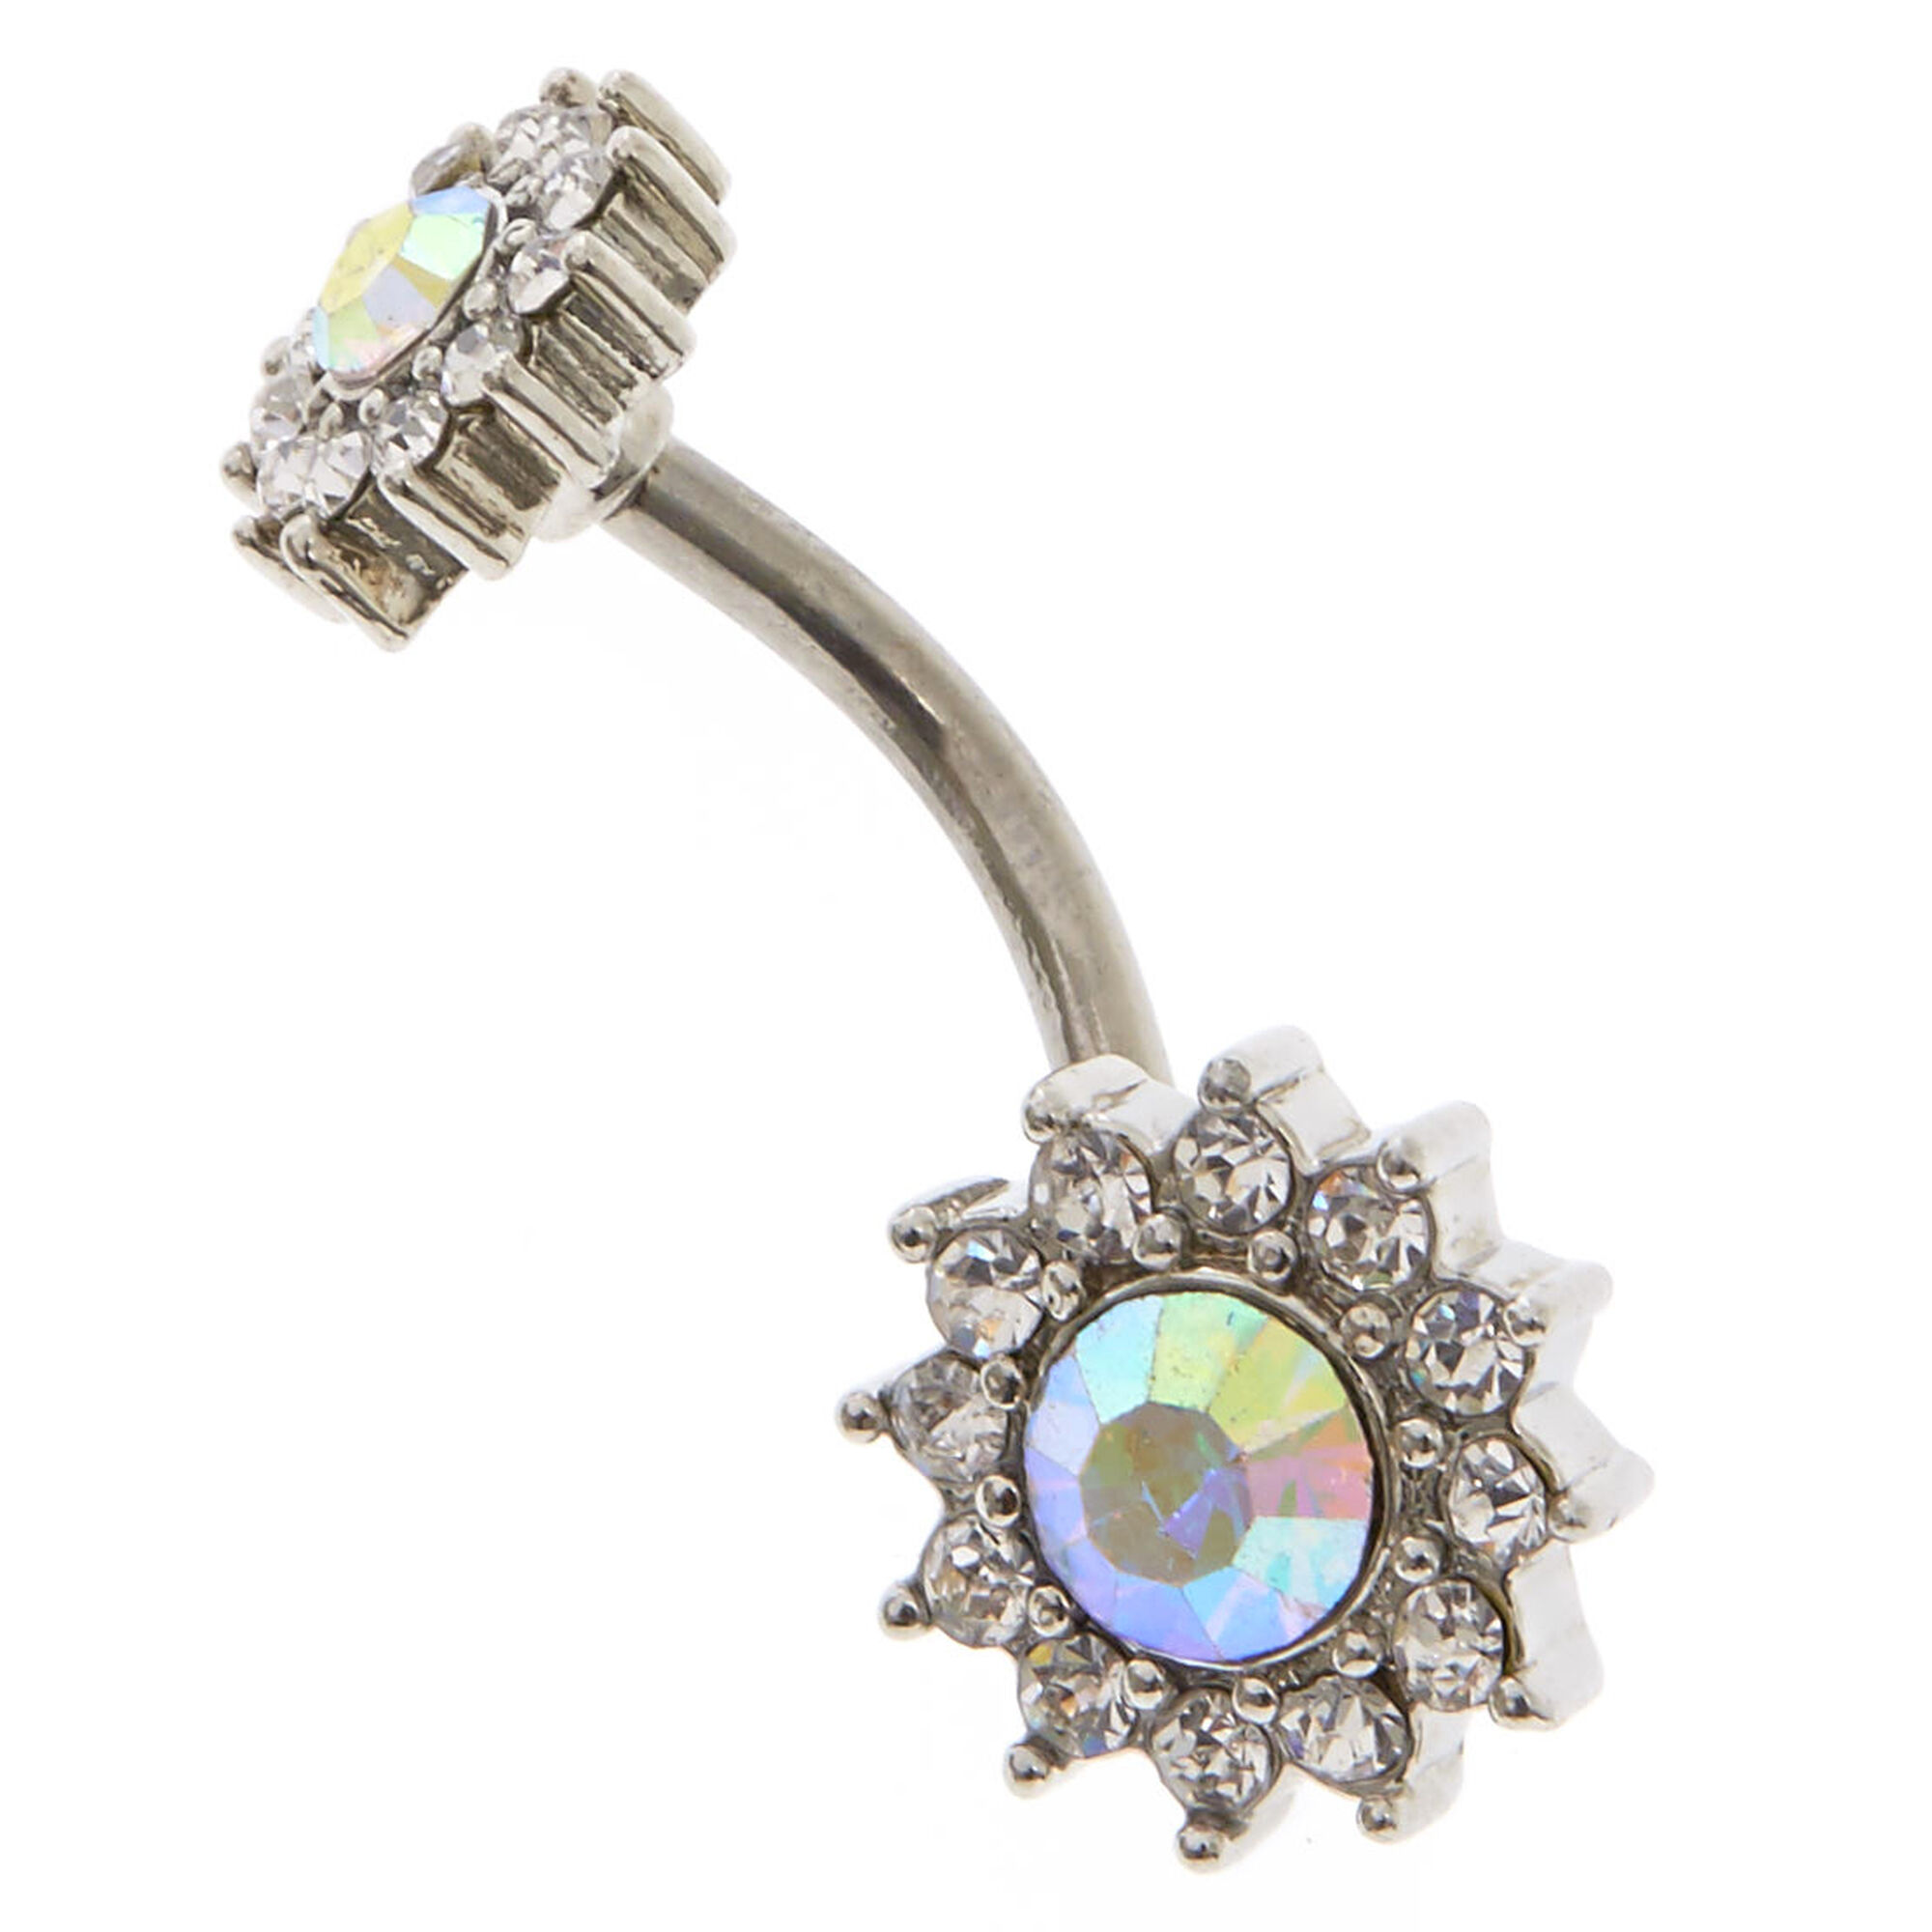 View Claires 14G Iridescent Stone Halo Flower Belly Ring Silver information